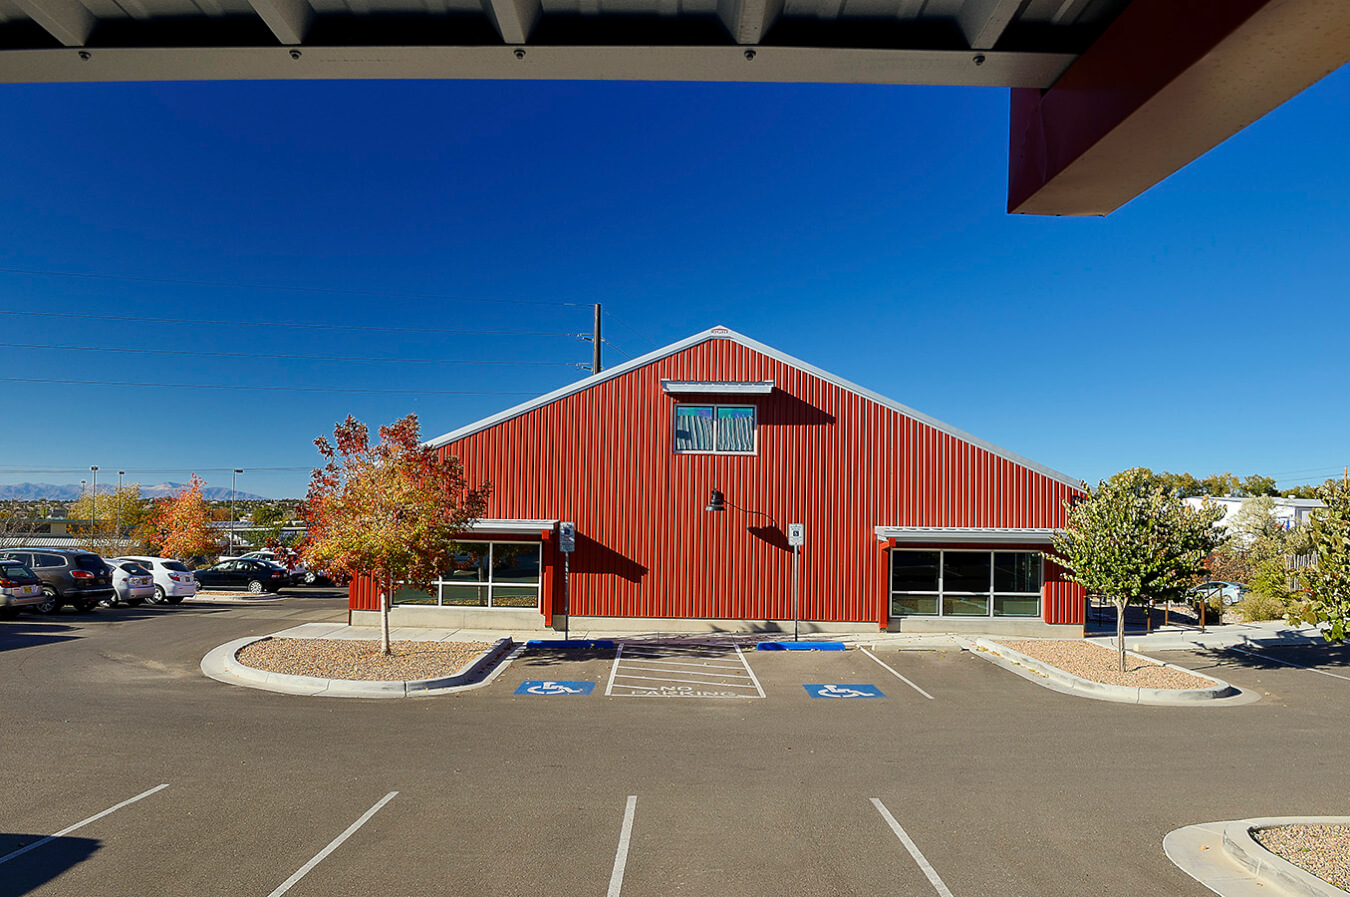 A Santa Fe parking lot with a red building.